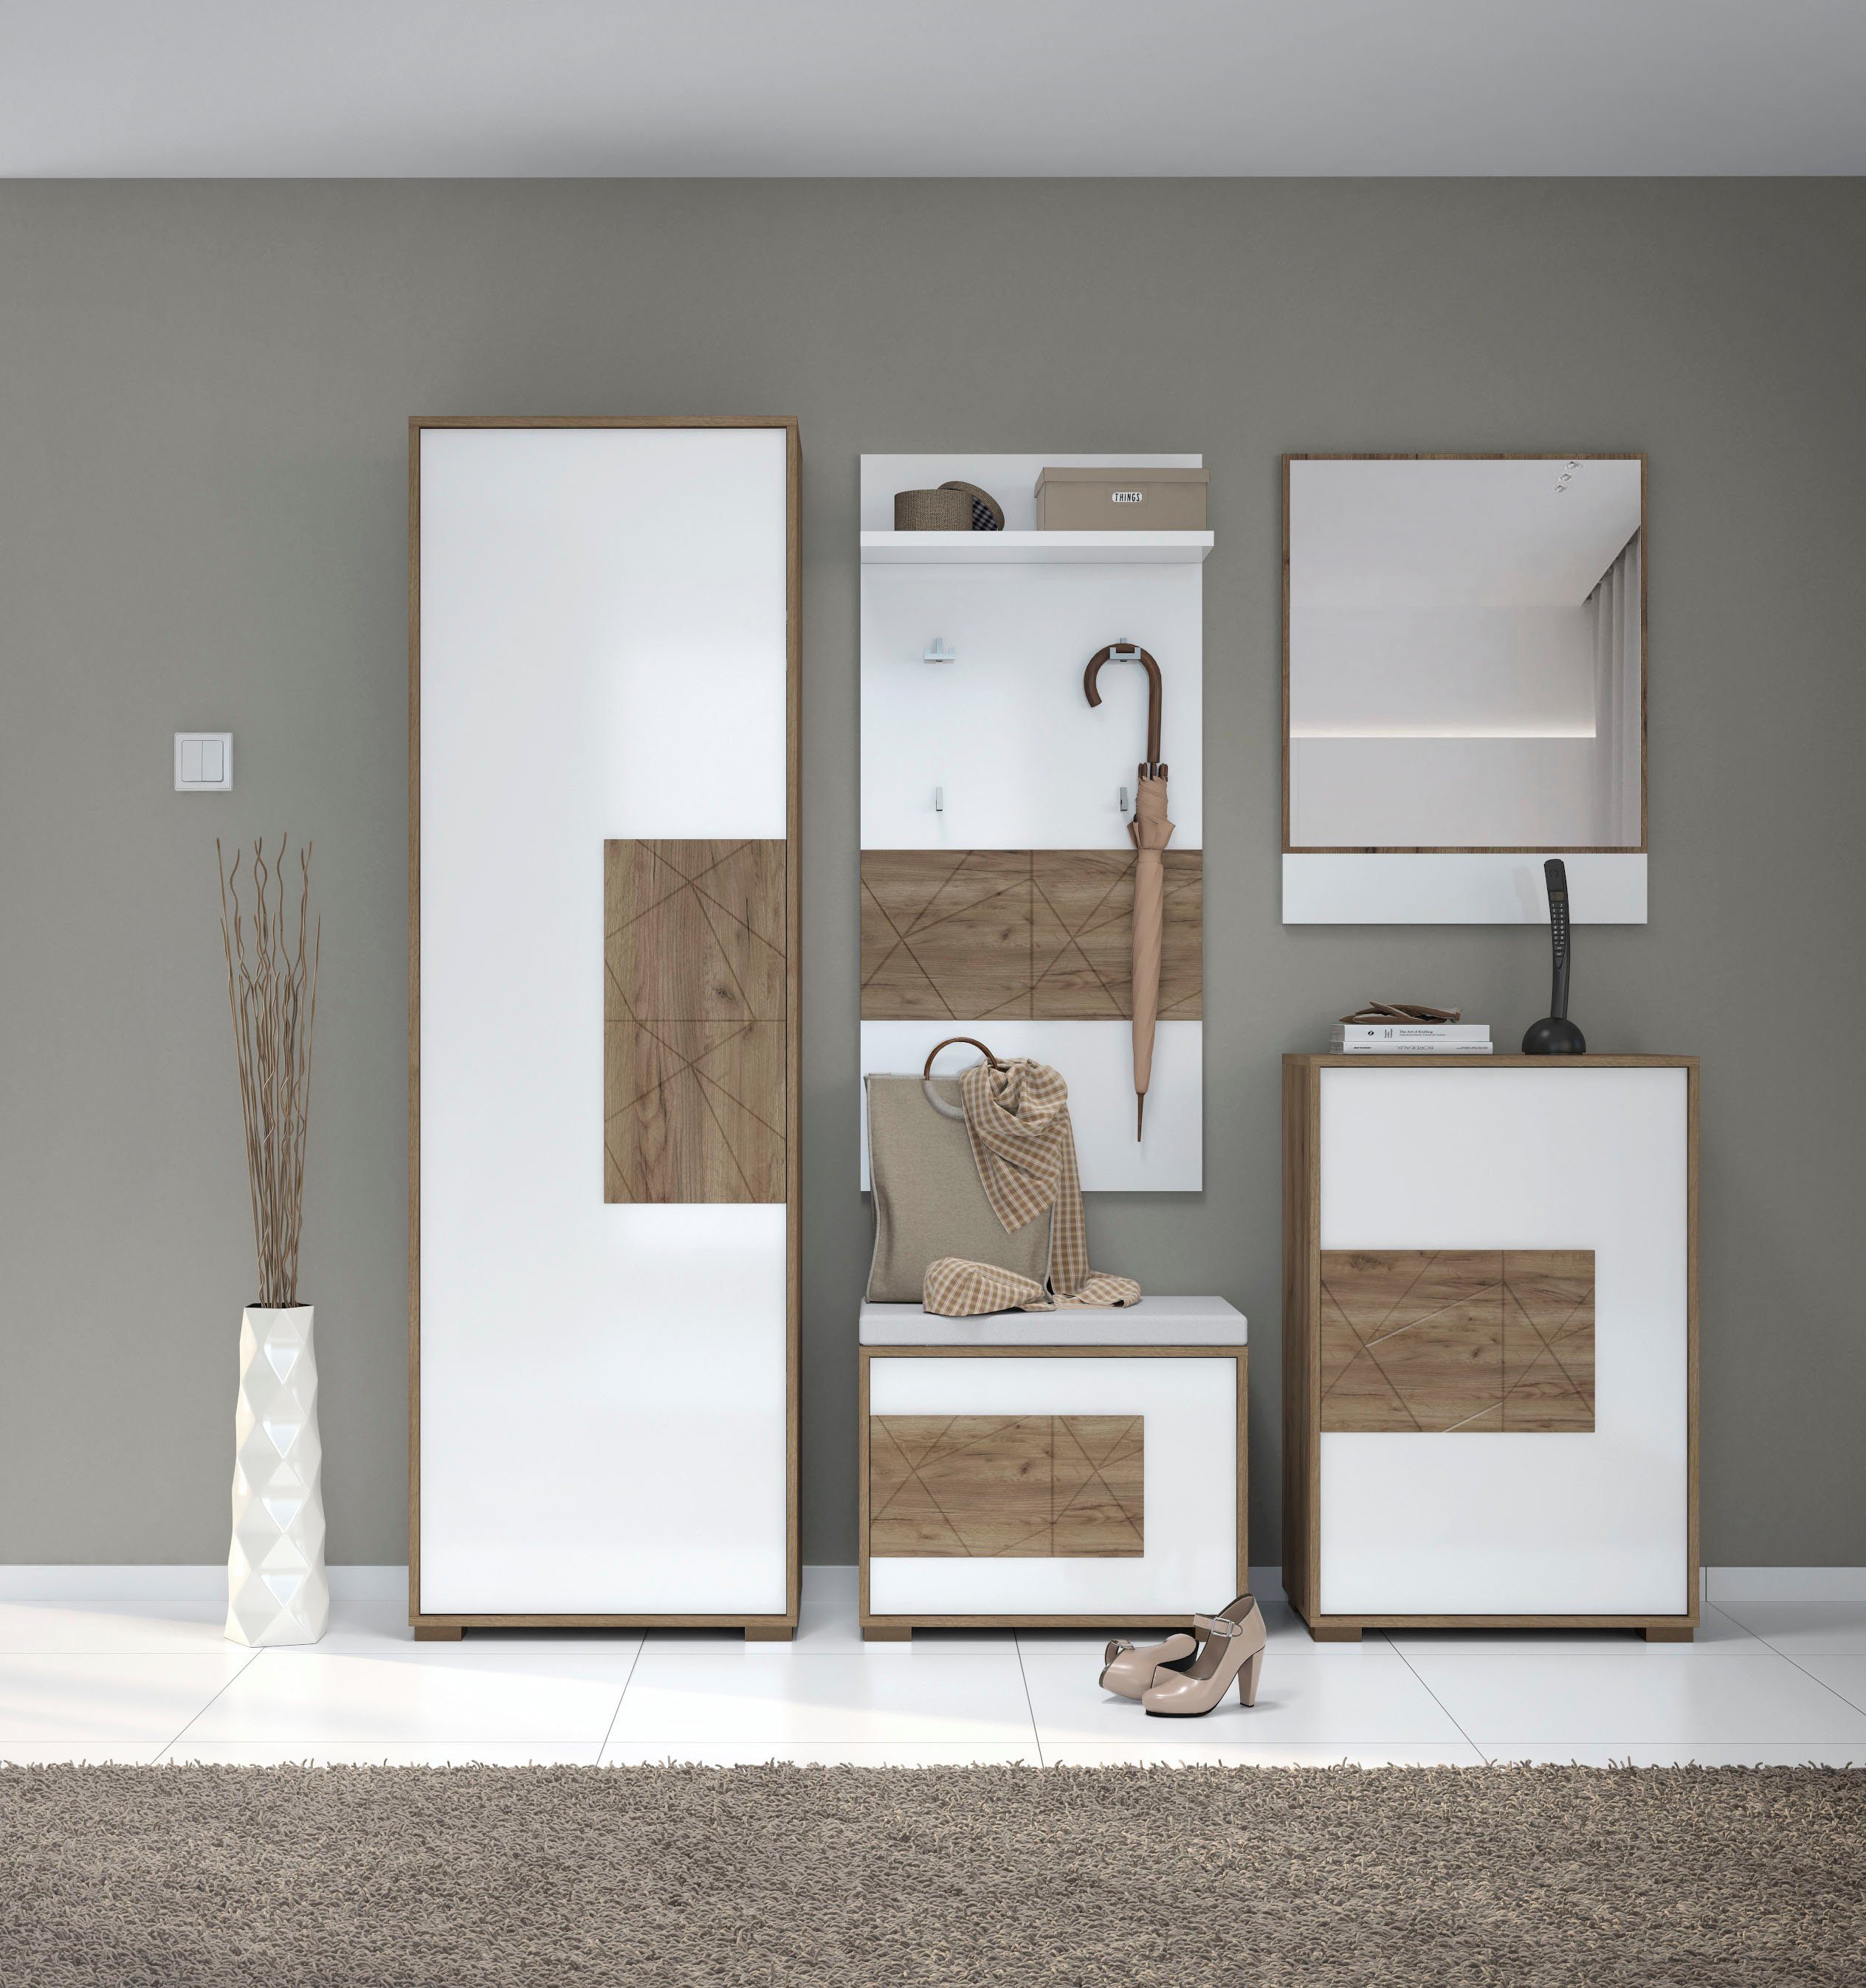 Places of Push-to-open-Funktion Garderobenschrank Stela mit Style